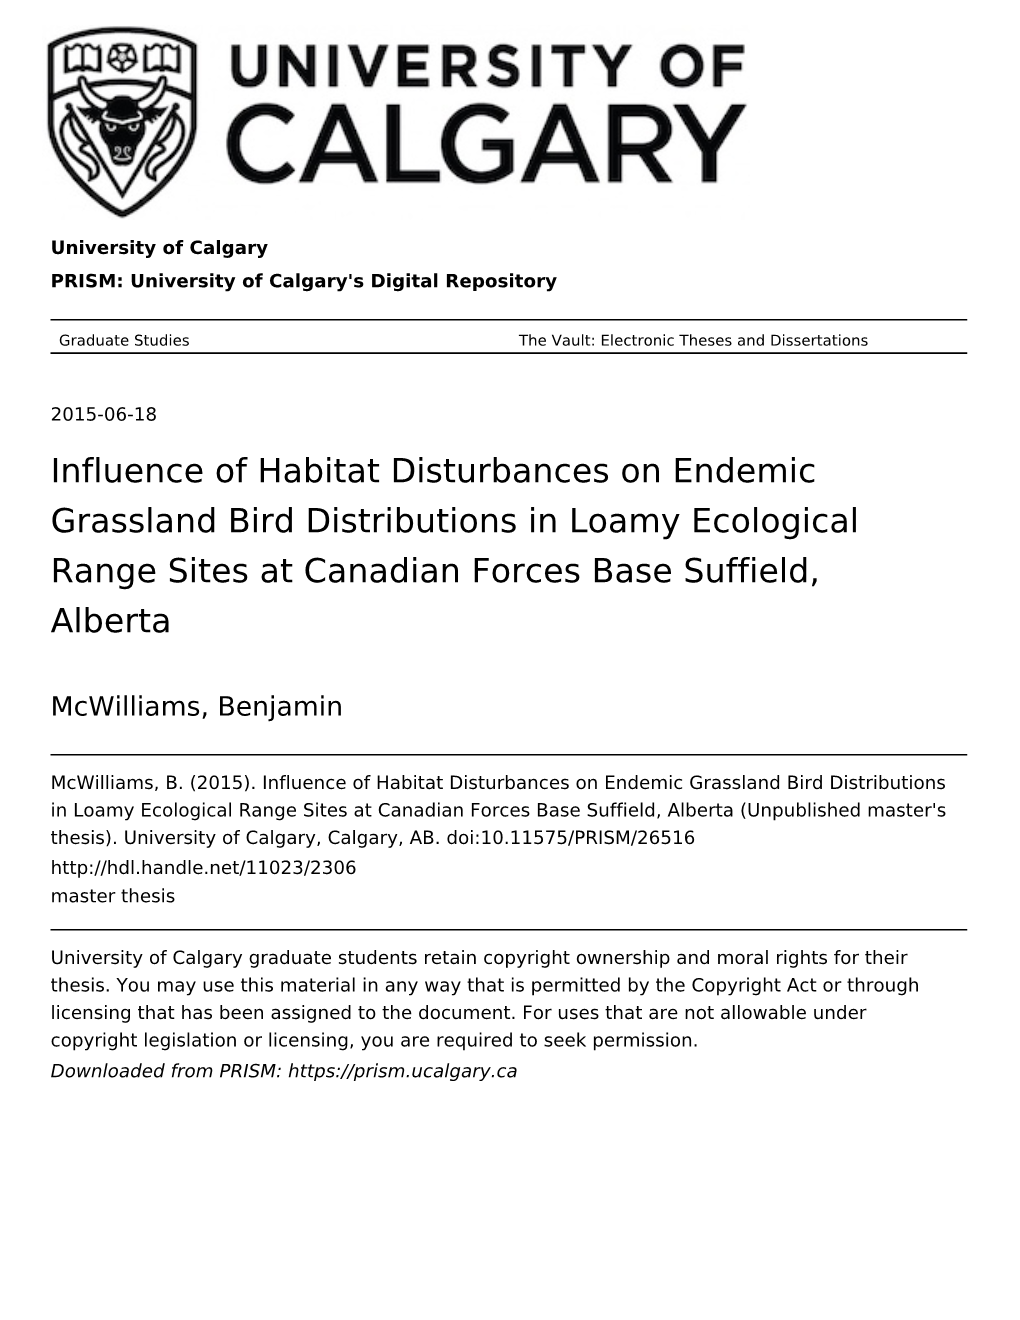 Influence of Habitat Disturbances on Endemic Grassland Bird Distributions in Loamy Ecological Range Sites at Canadian Forces Base Suffield, Alberta